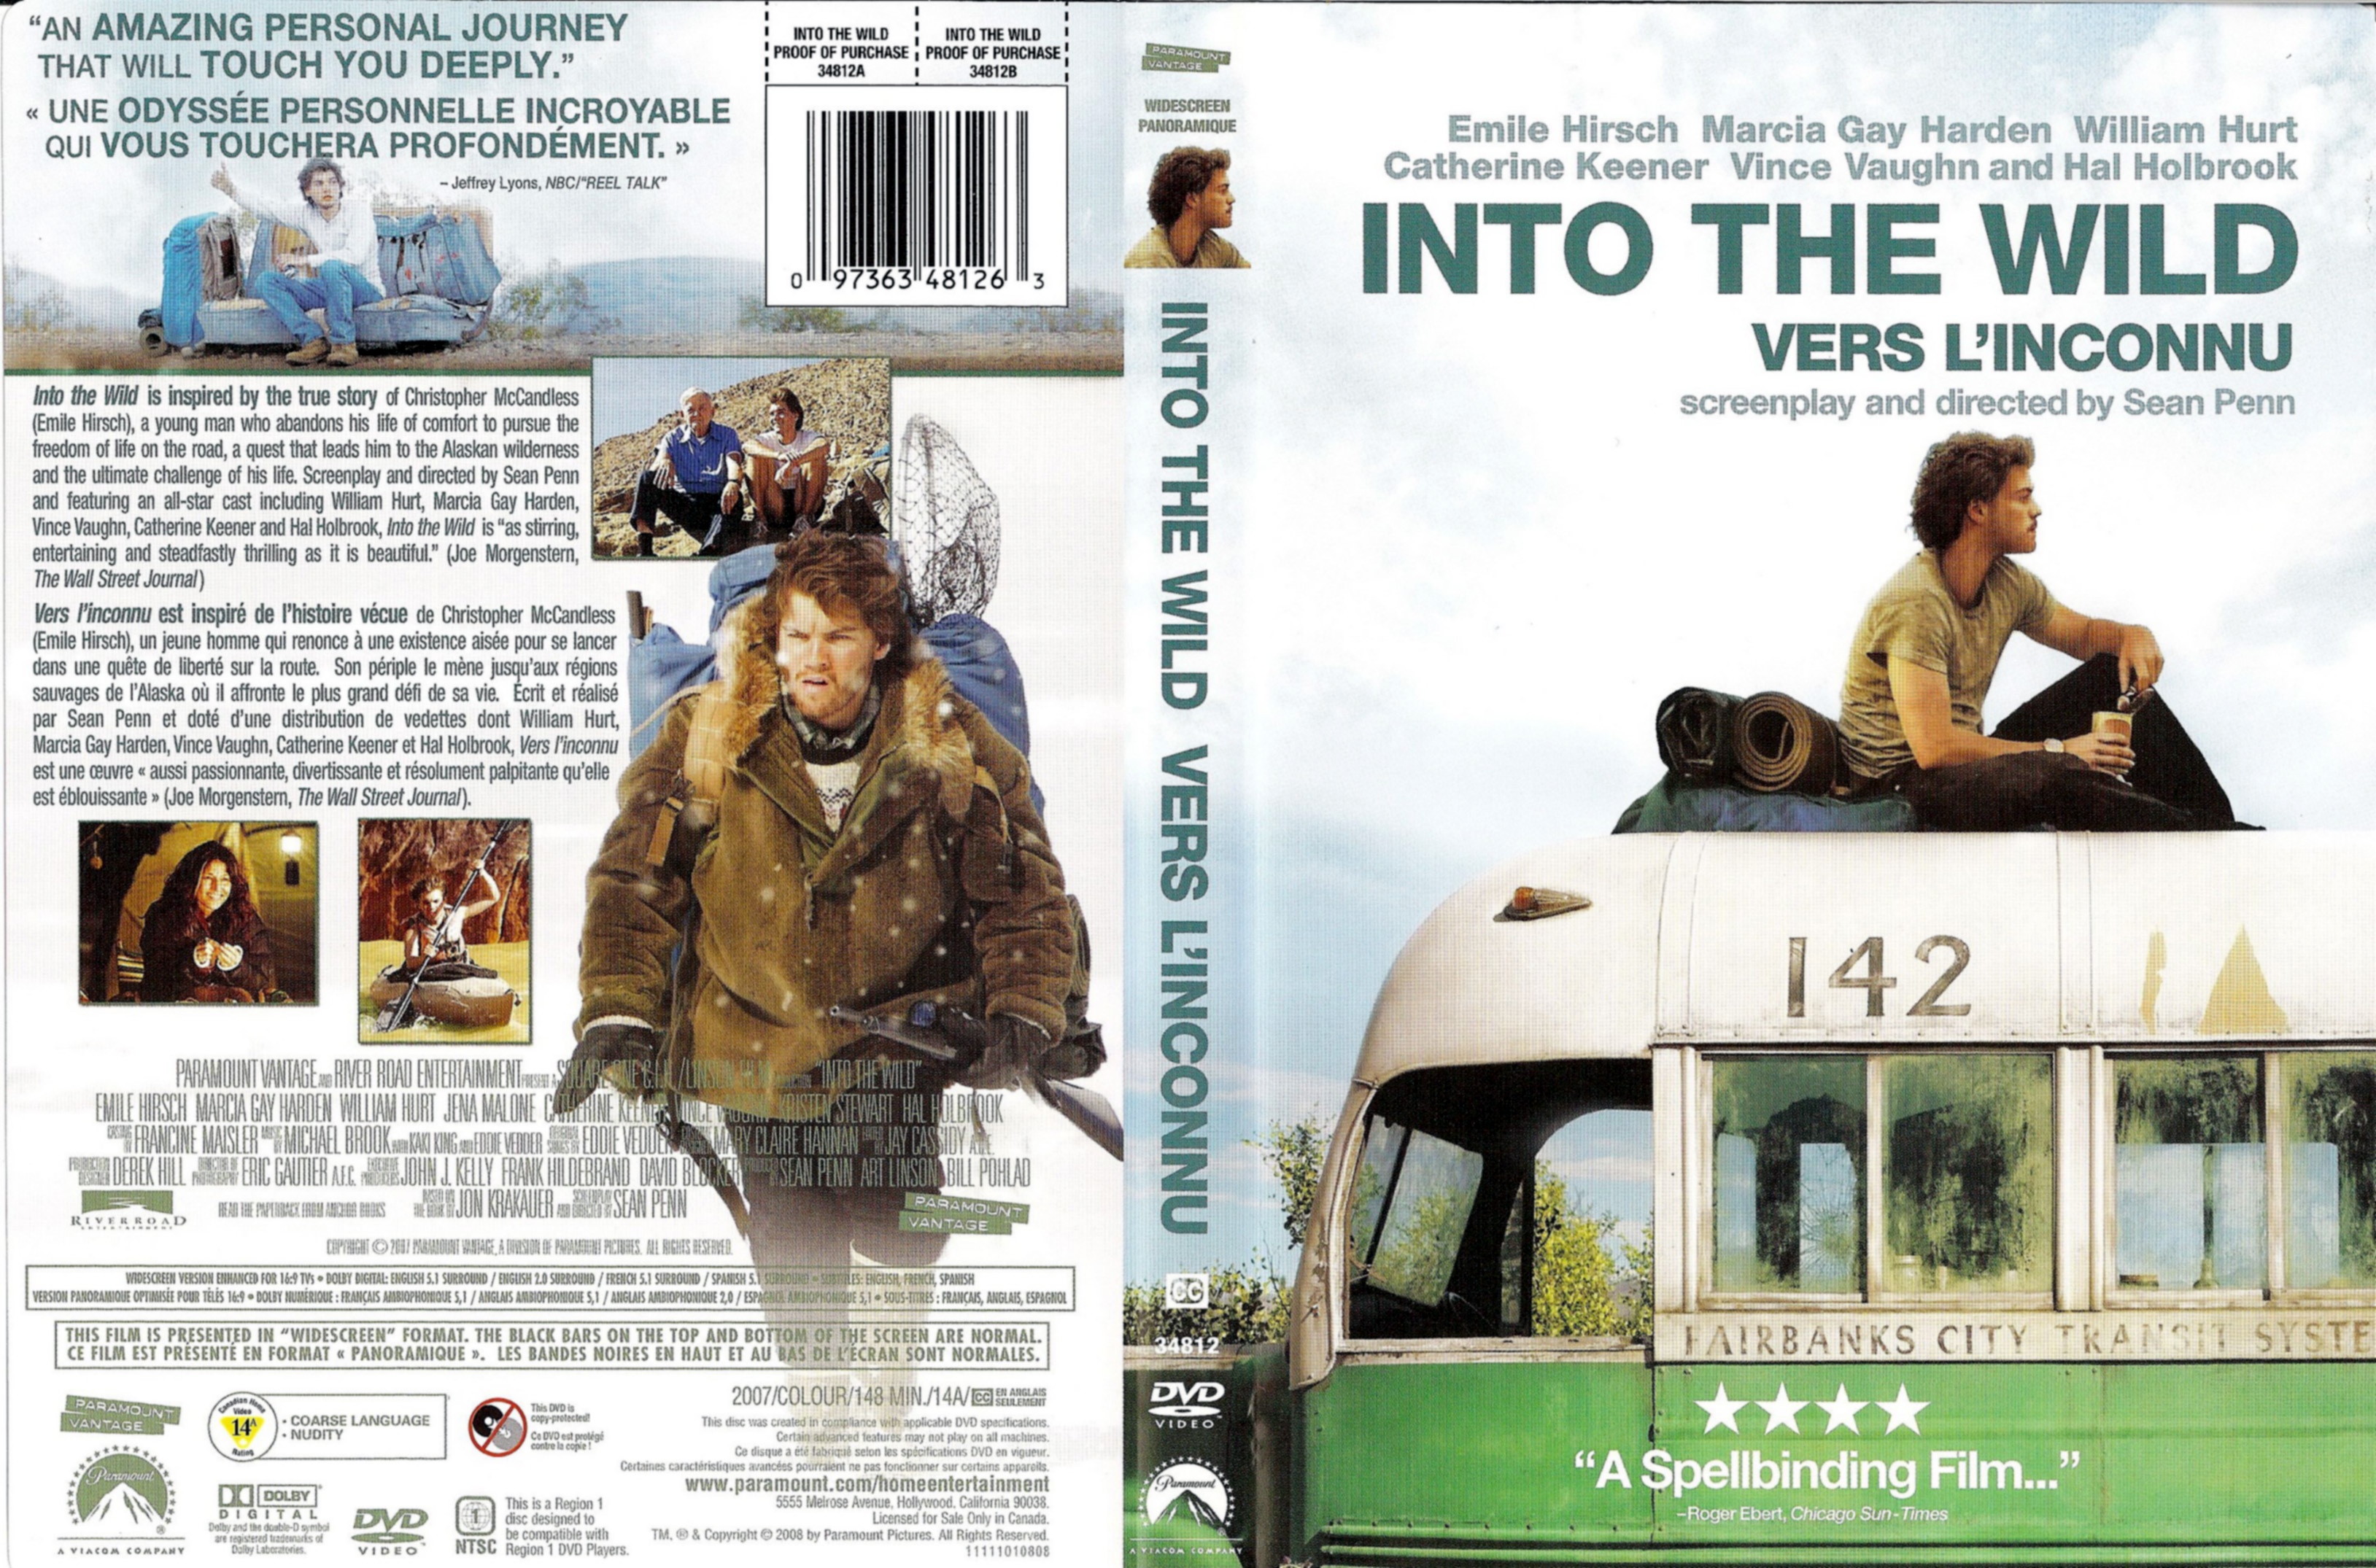 Jaquette DVD Into the wild - Vers l